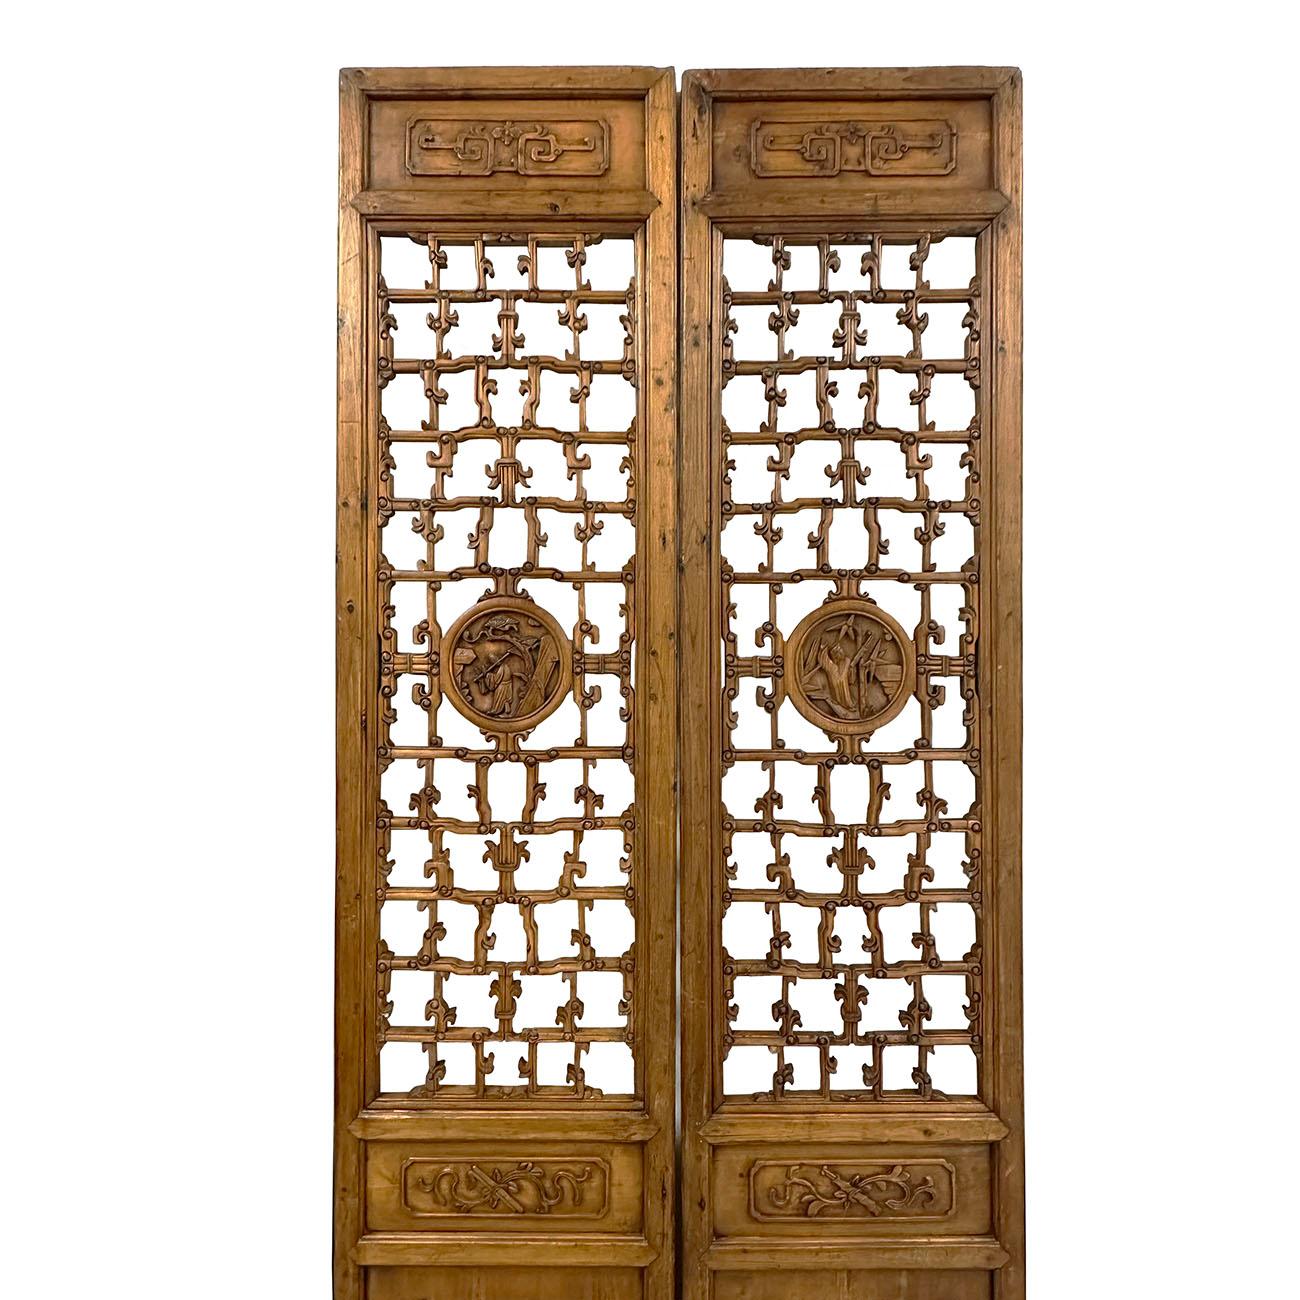 Late 19th Century Antique Chinese Hand Carved 6 Panels Wooden Screen/Room Divide In Good Condition For Sale In Pomona, CA